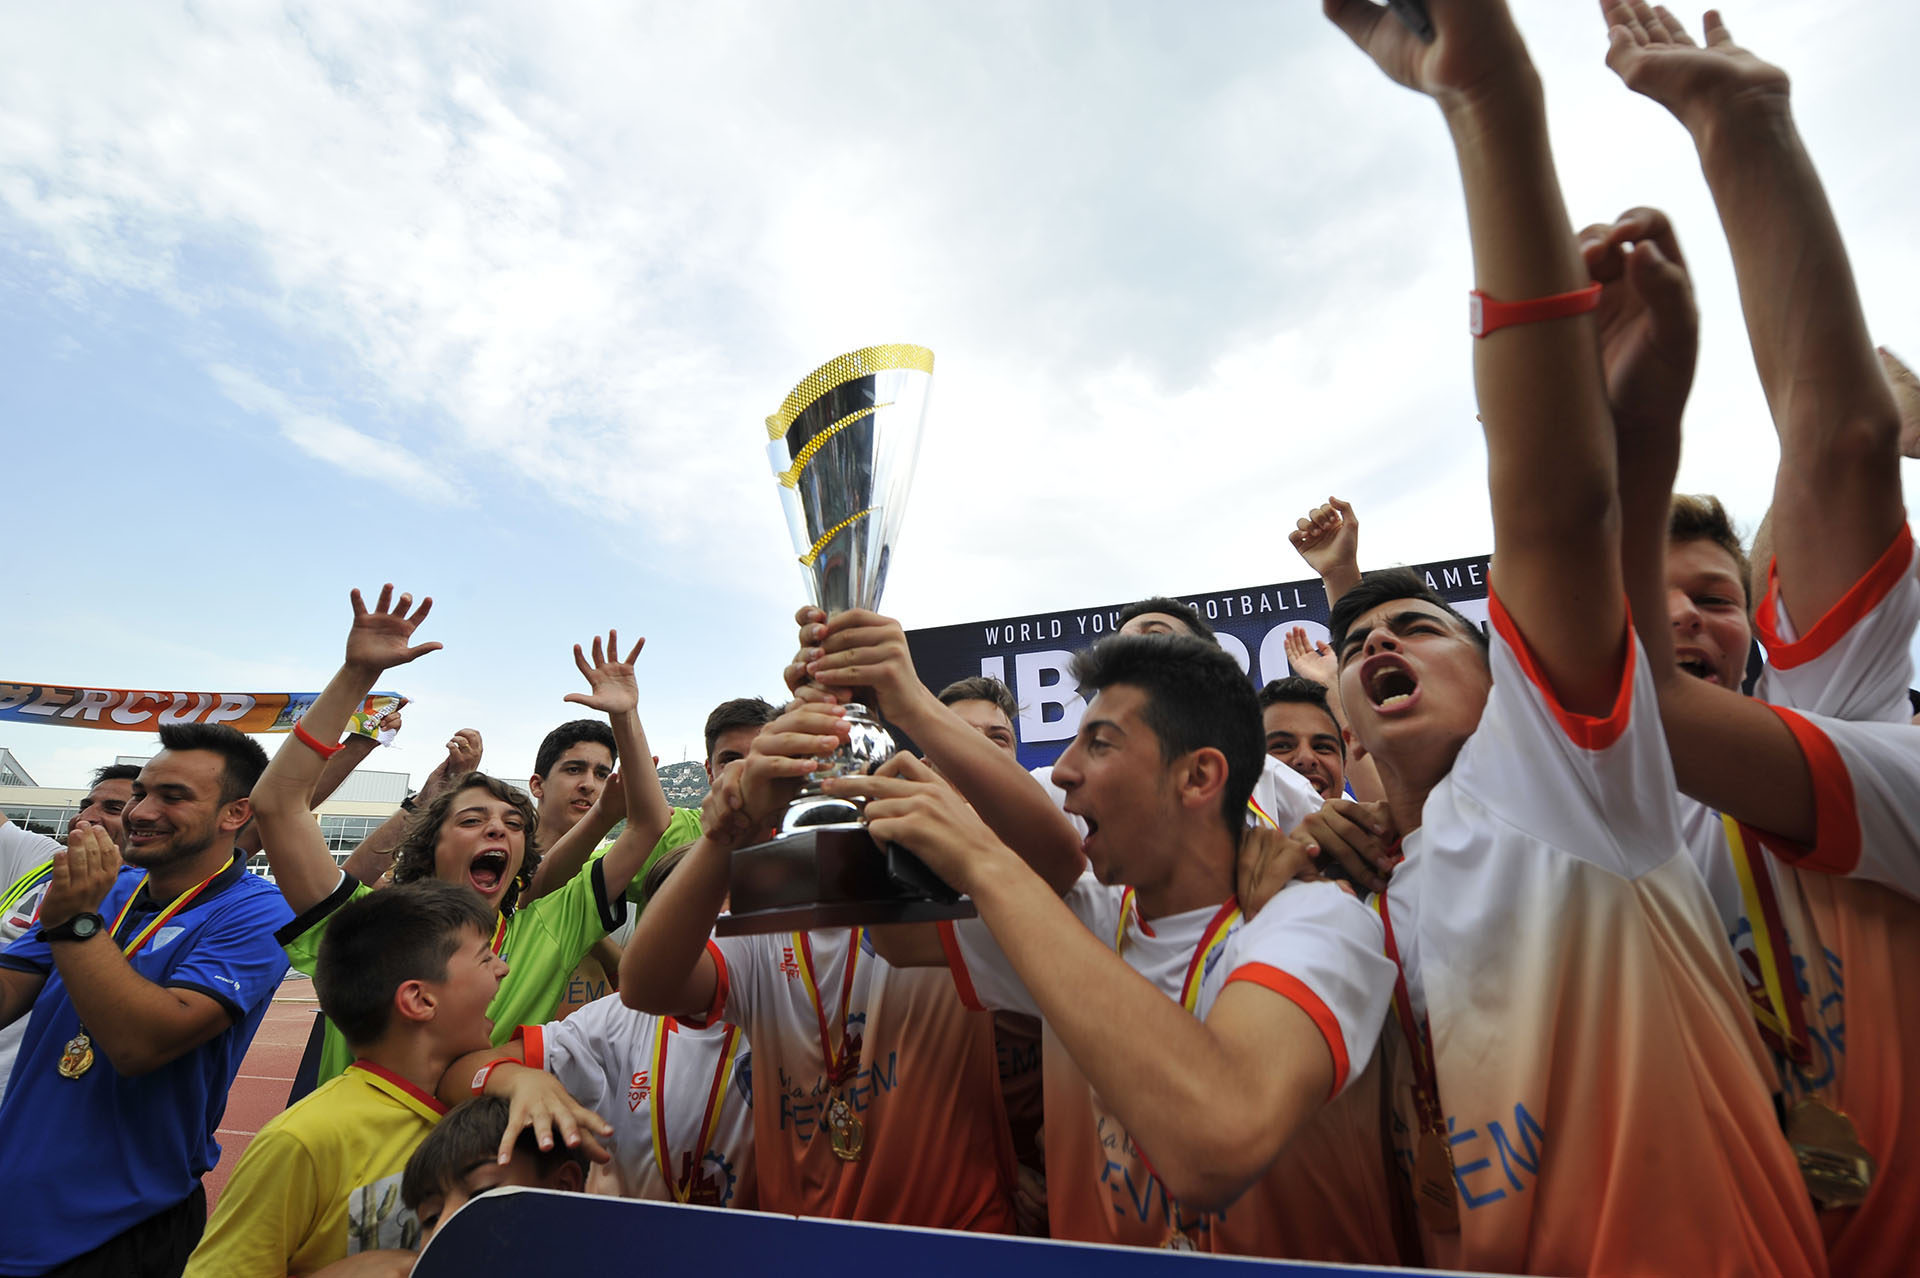 IberCup Barcelona - cheering players with the cup - Road to Sport